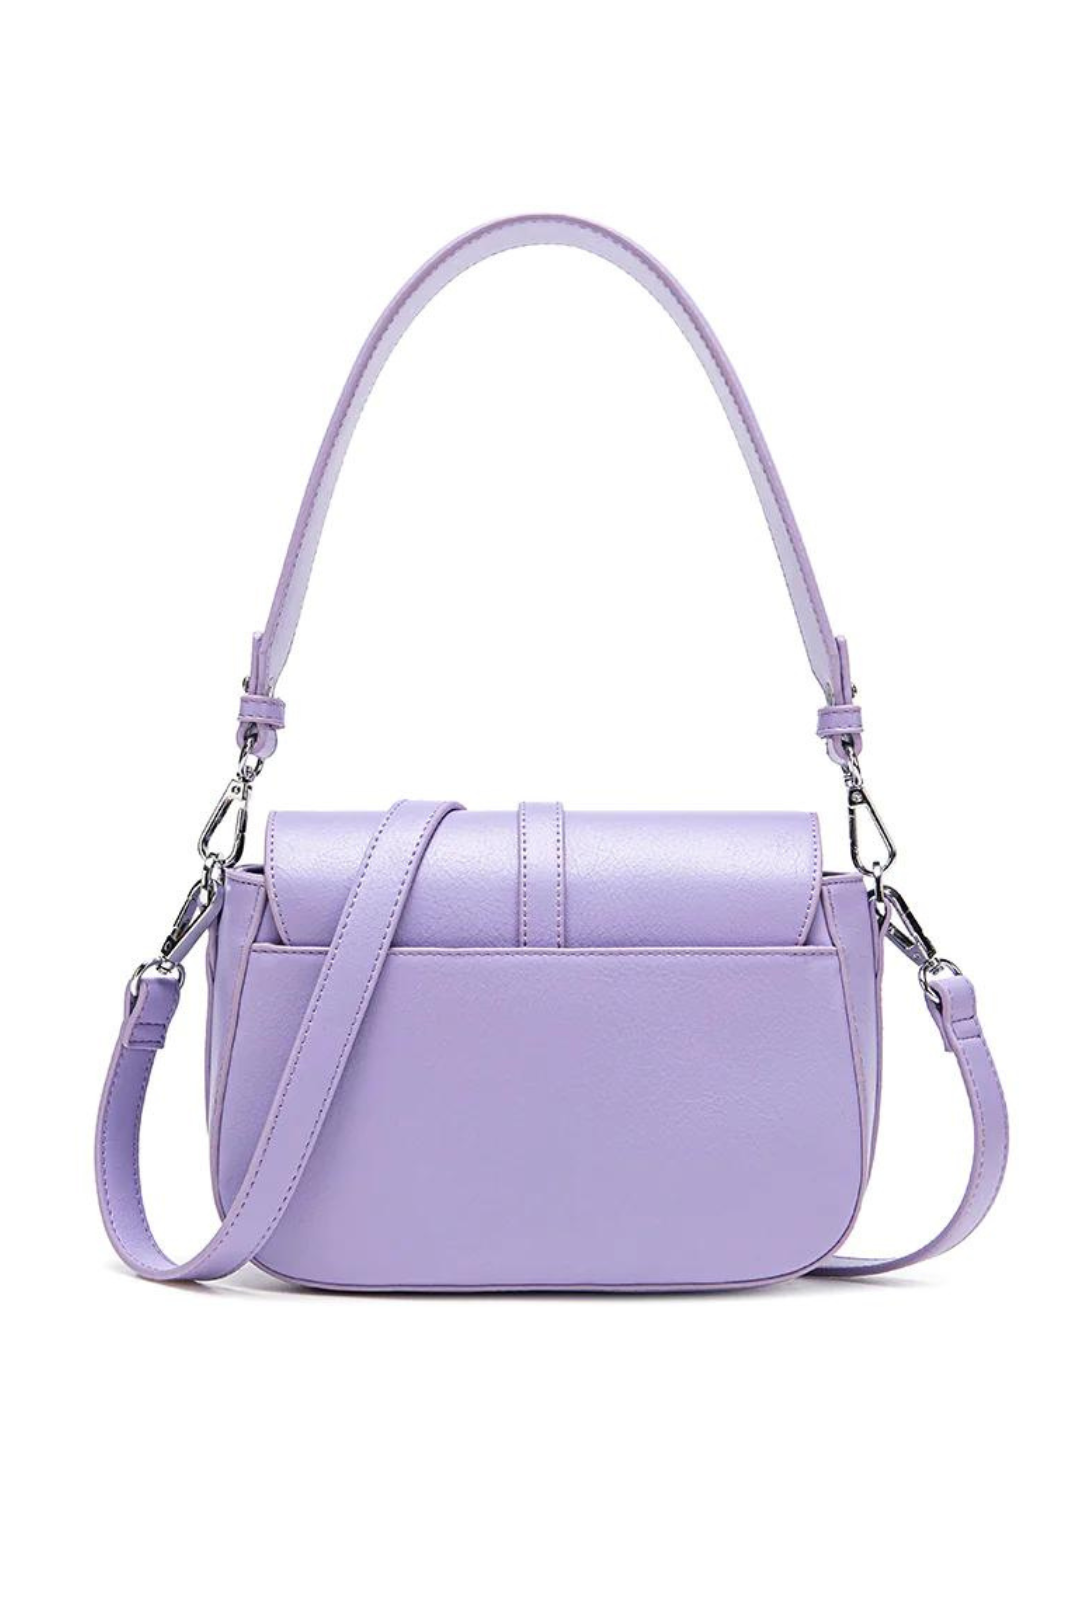 Pixie Mood Athena Saddle Bag- Lavender. With the distinctive turnlock hardware the Athena Saddle bag is the perfect accessory to polish up even the most casual outfit. This style staple is a must-have for your wardrobe.